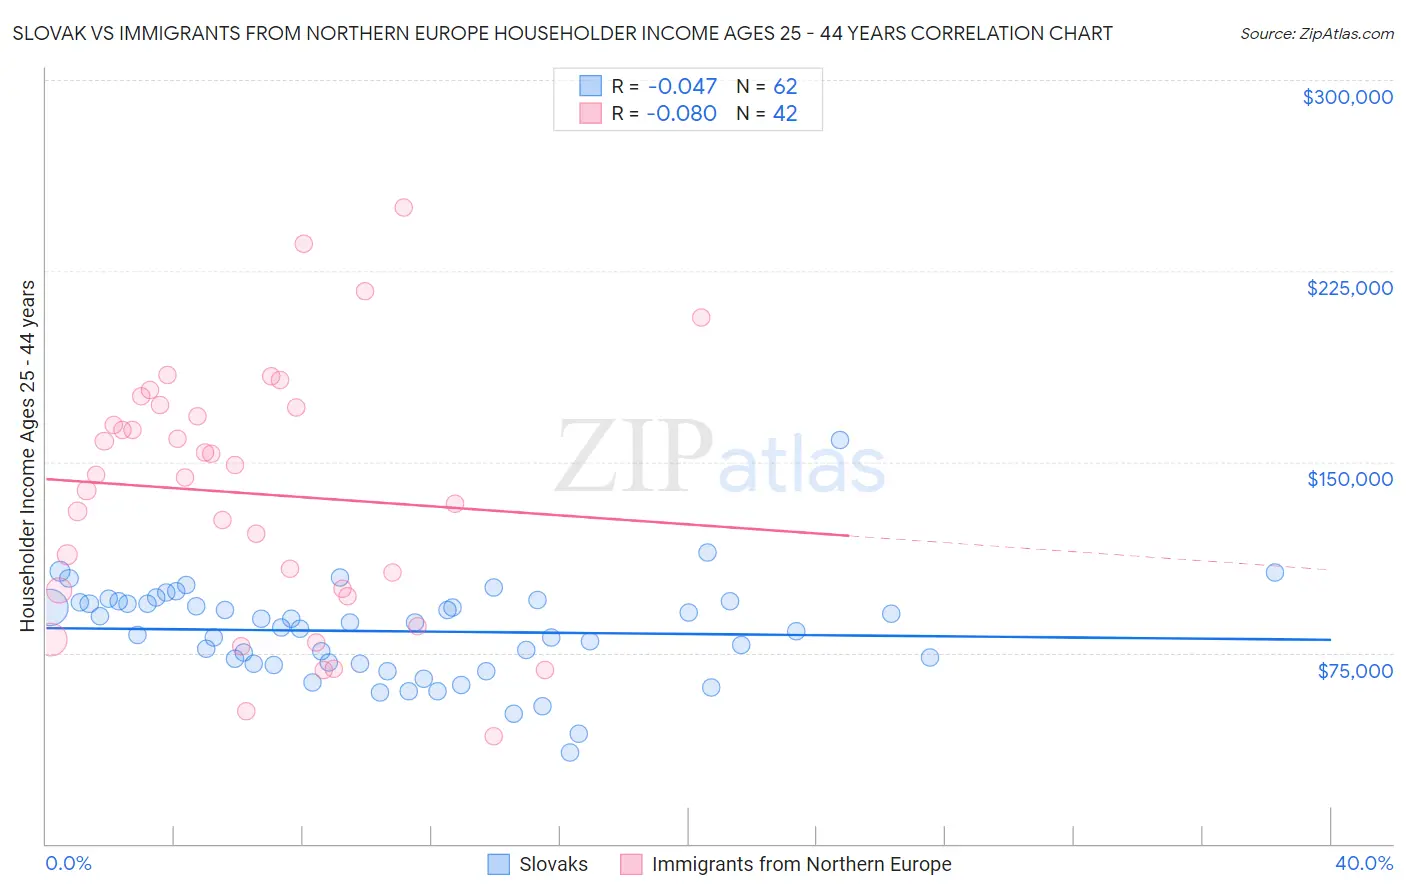 Slovak vs Immigrants from Northern Europe Householder Income Ages 25 - 44 years